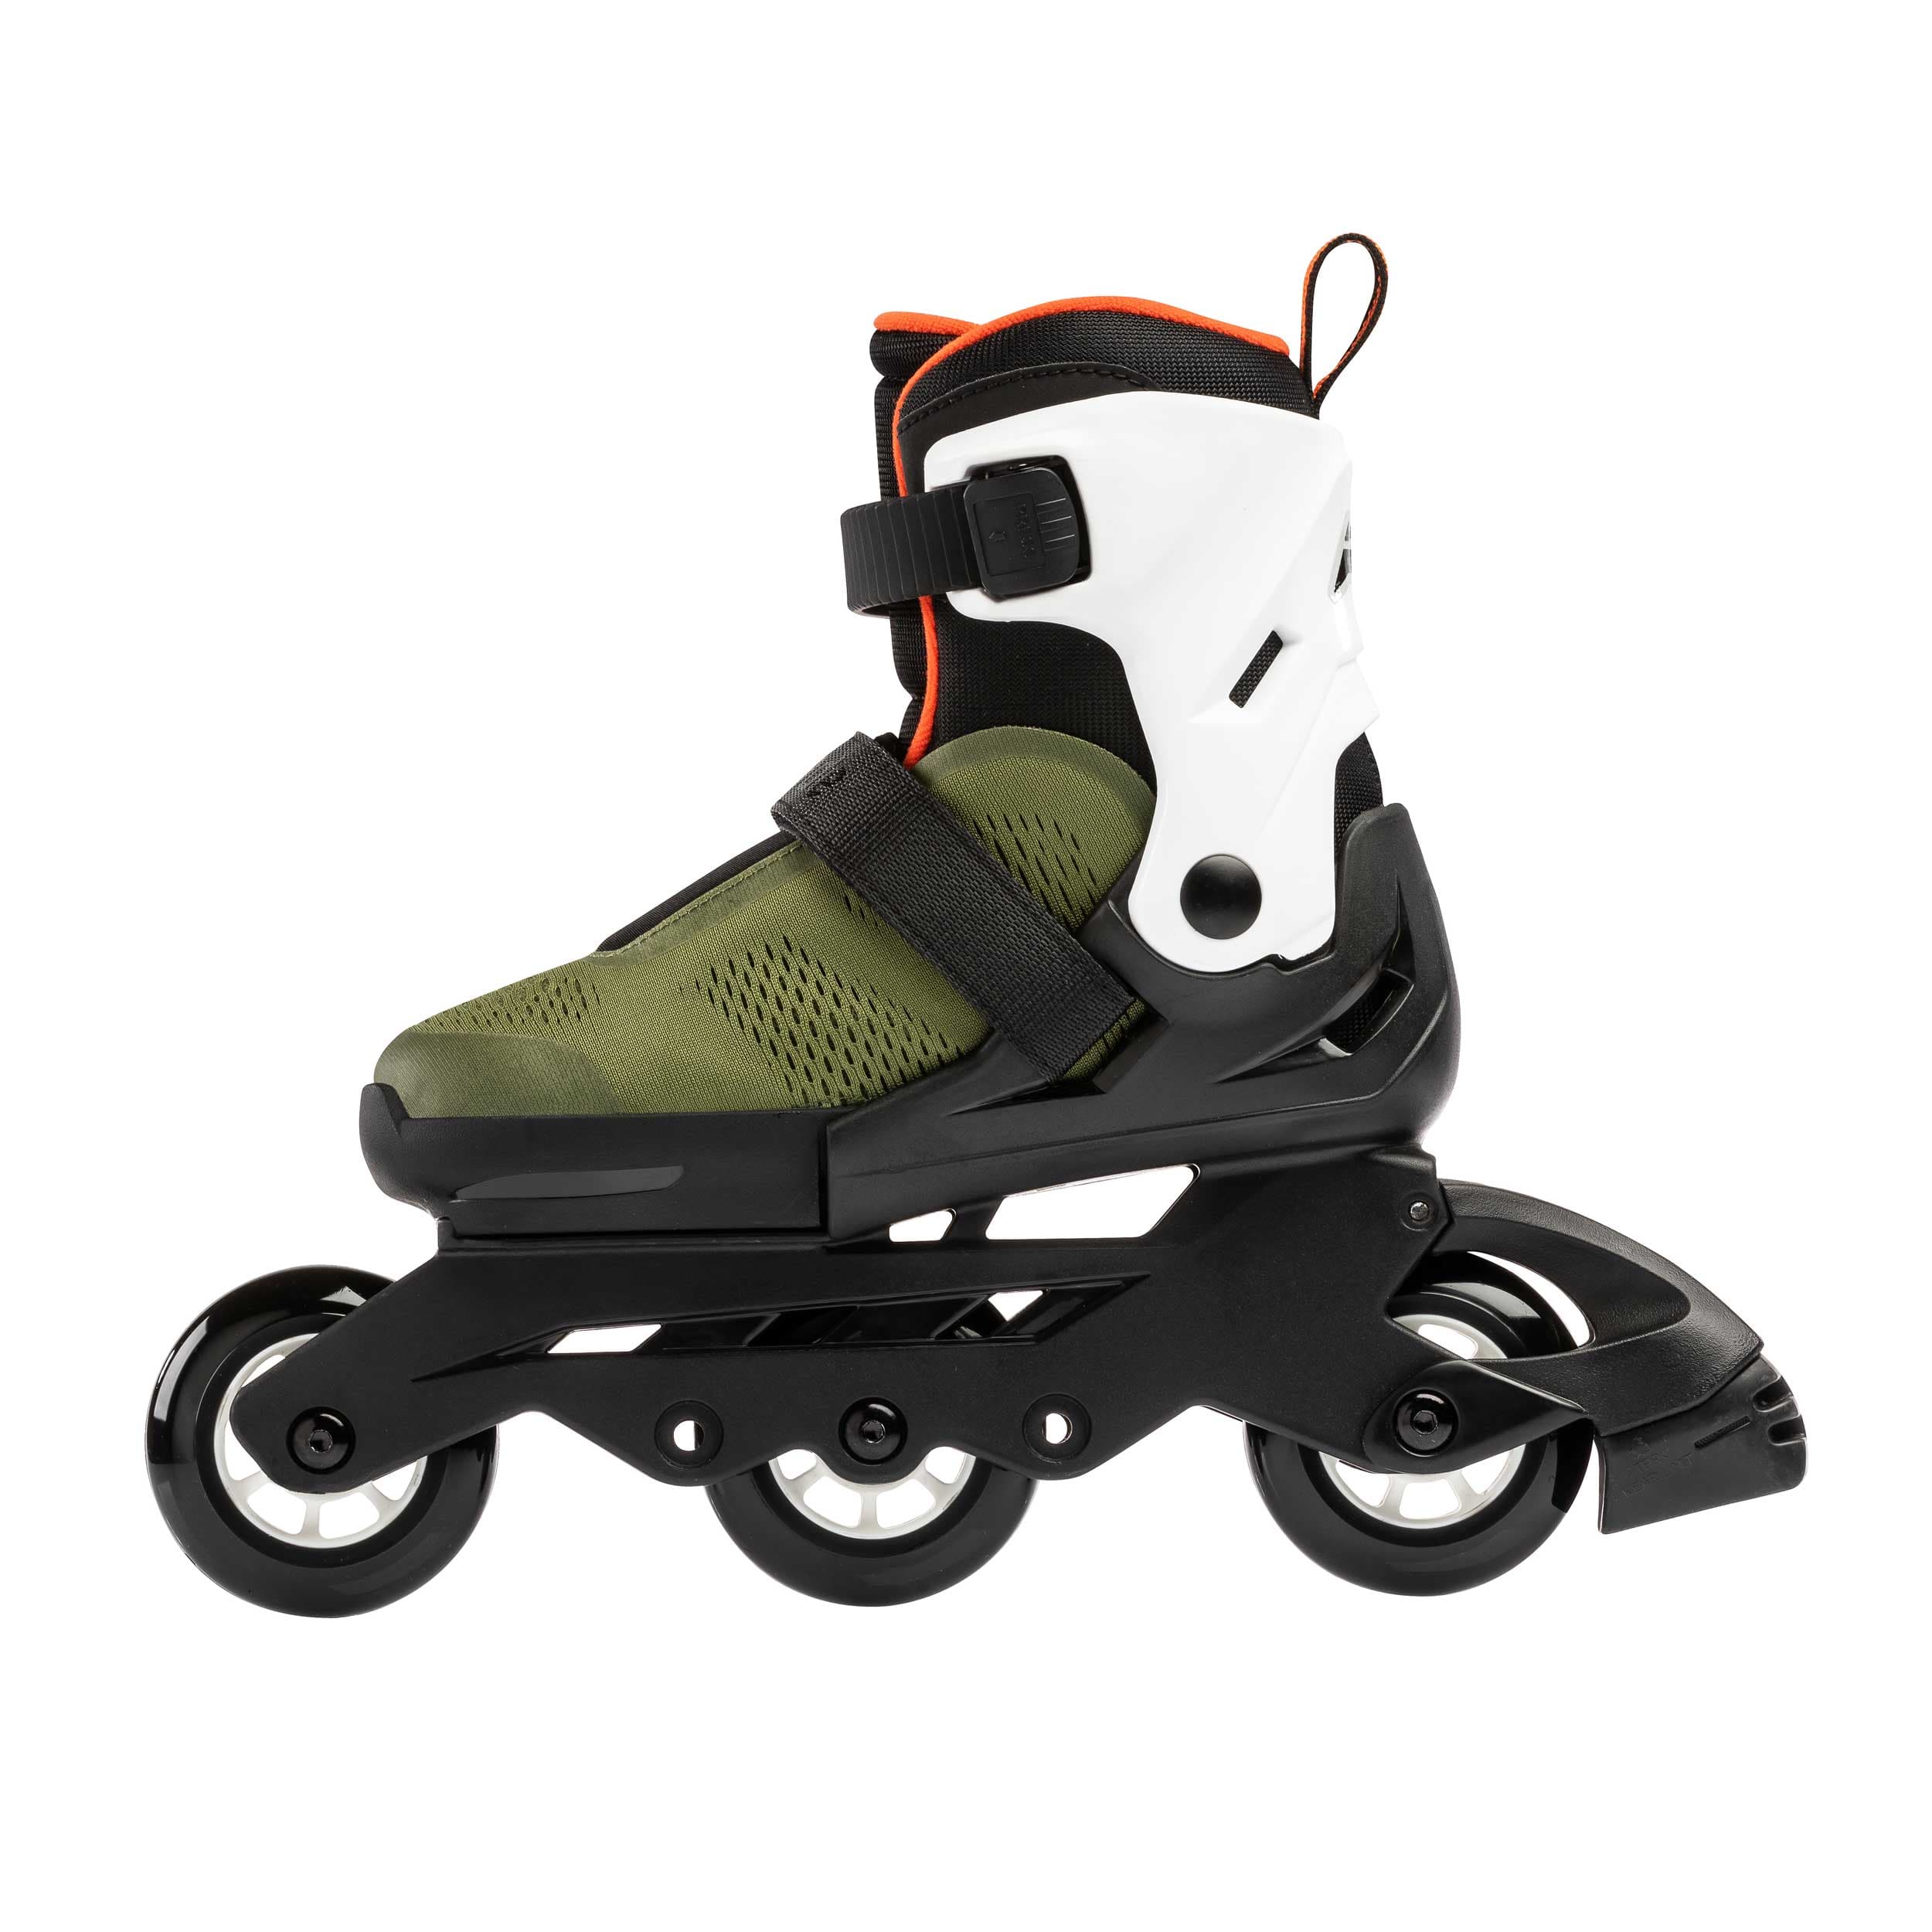 rollerblade-microblade-3wd-skates-inside-side-view